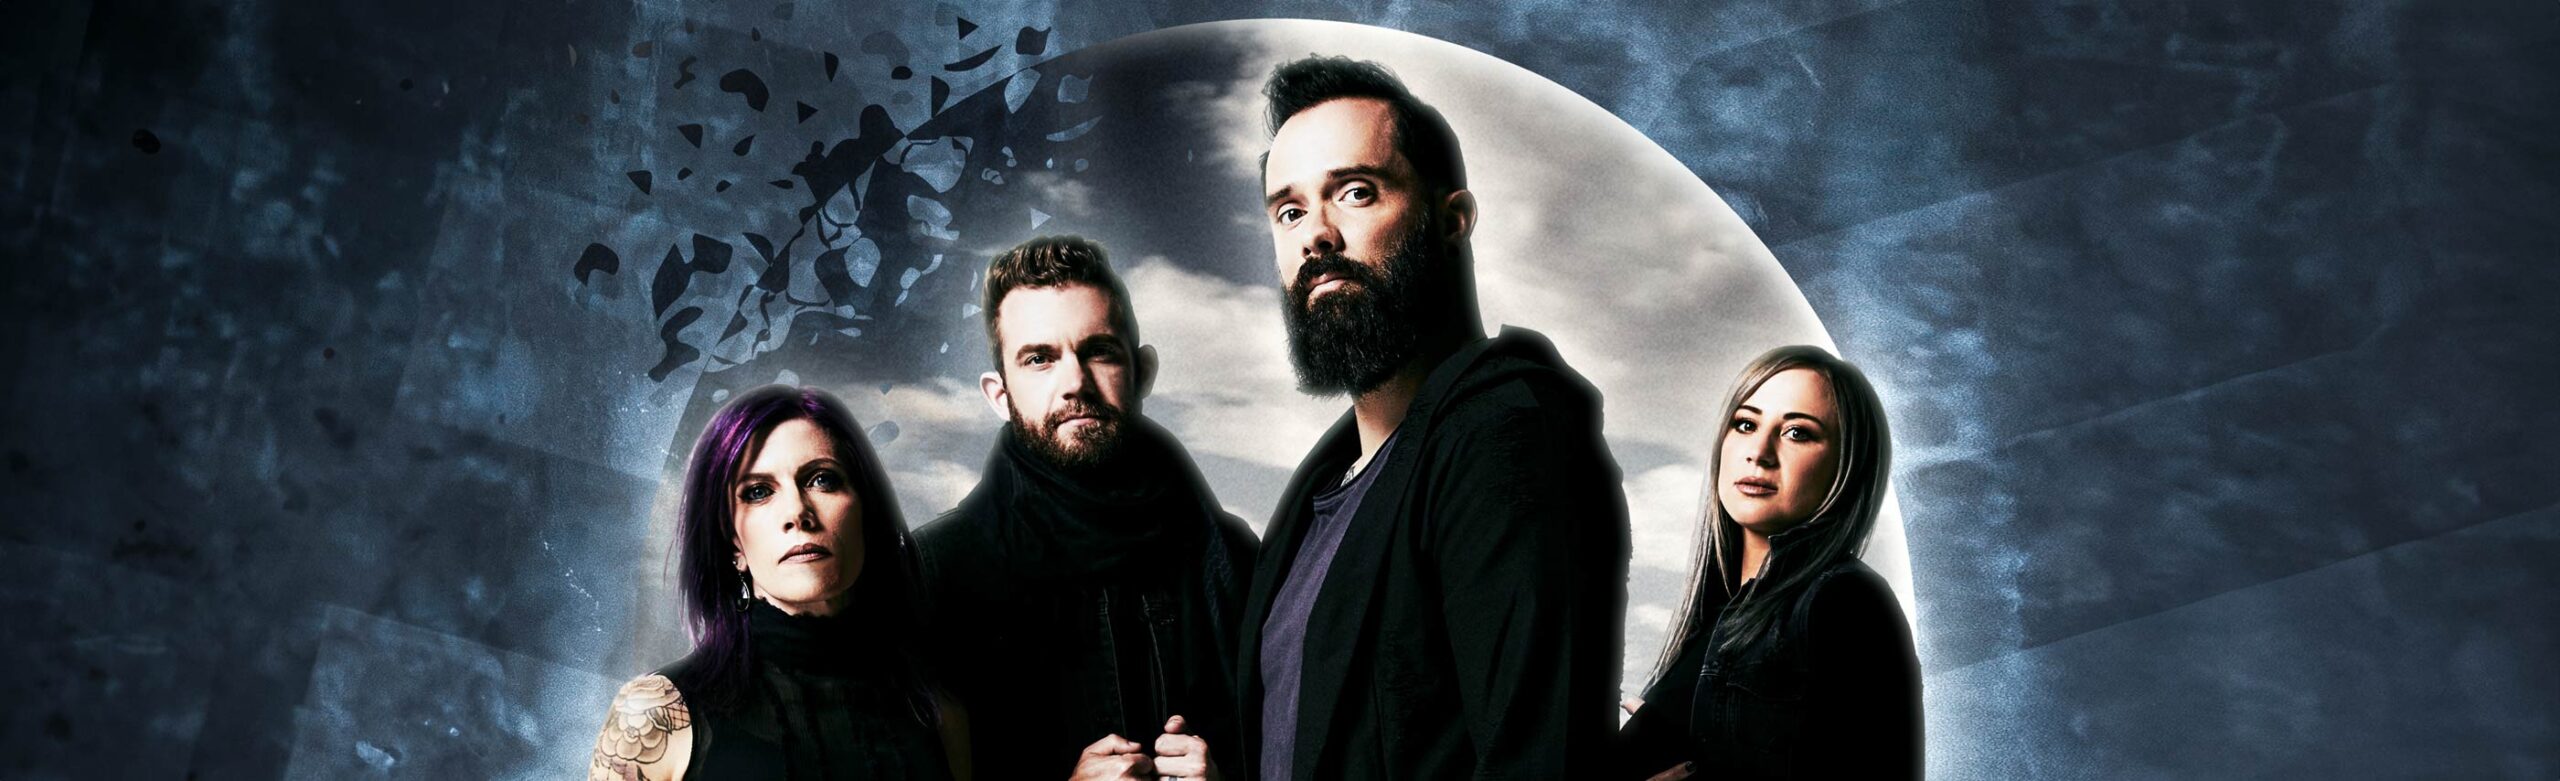 Skillet Announces Concerts in Bozeman and Missoula with Adelitas Way Image